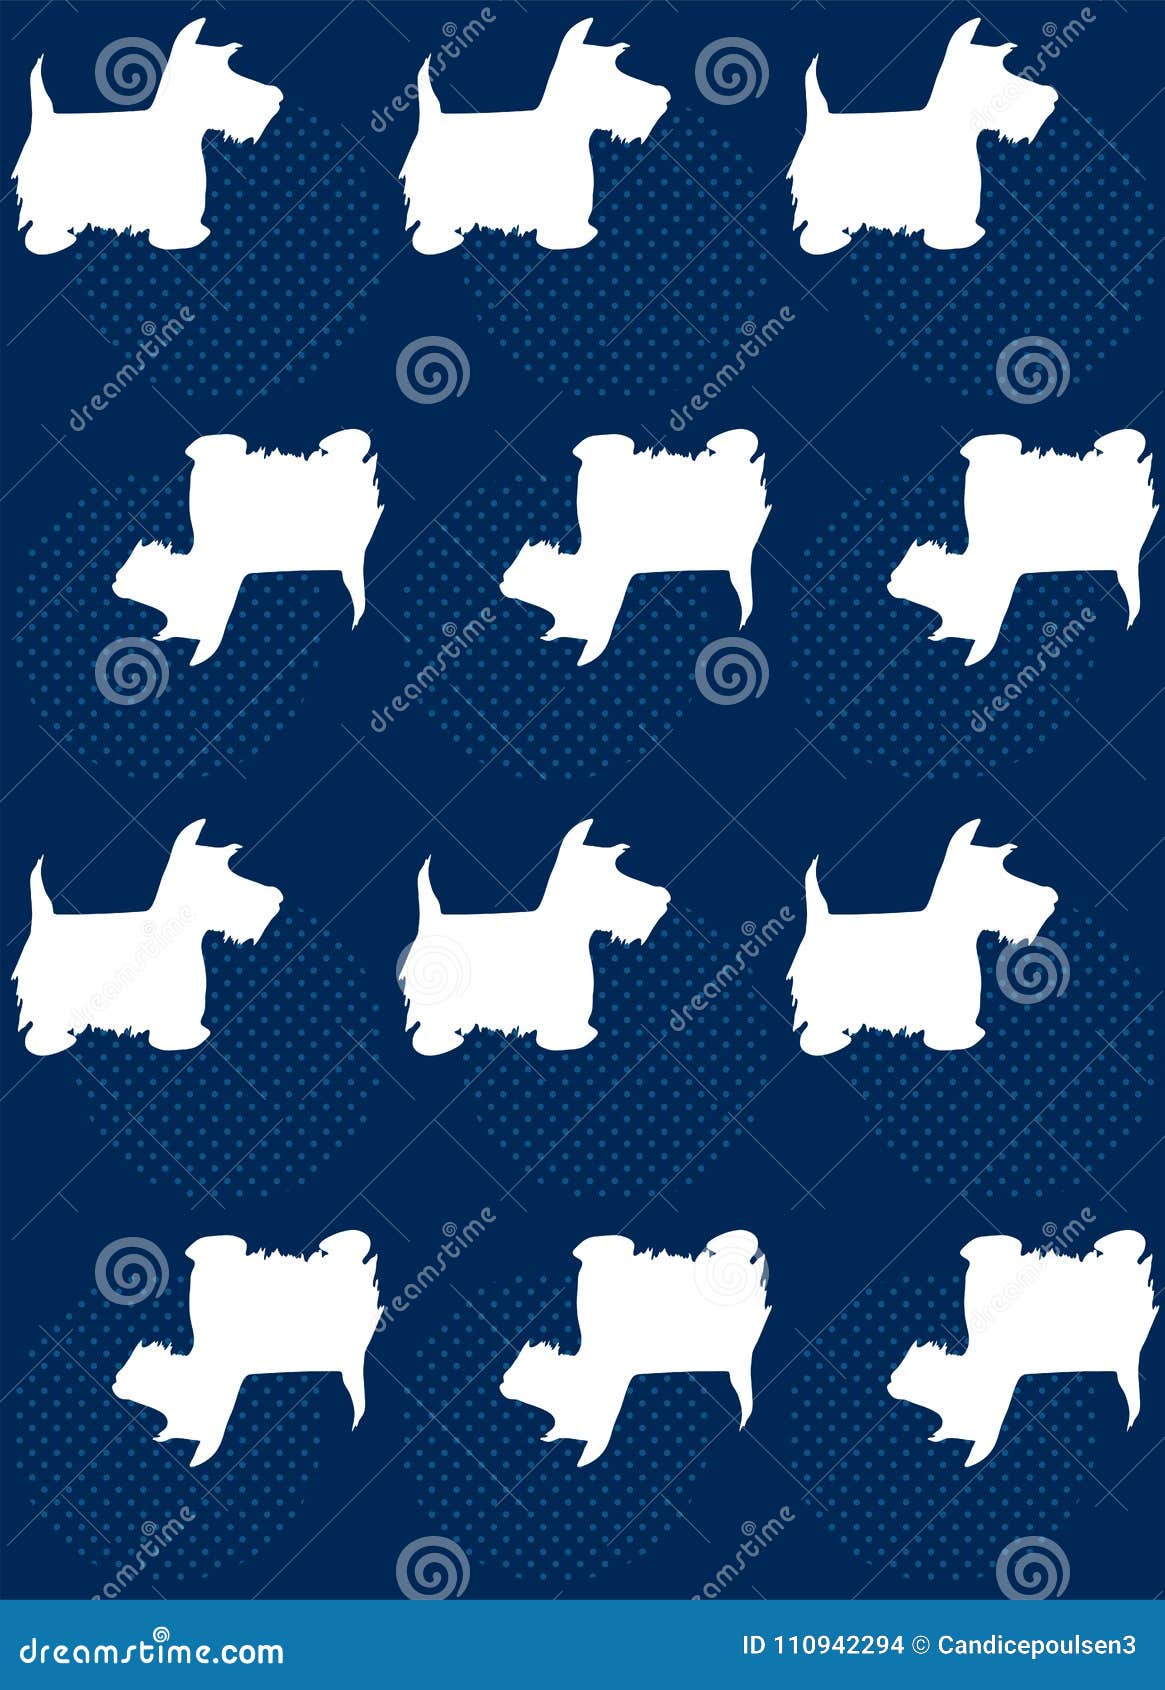 silhouette scottie dogs with dots repeat pattern